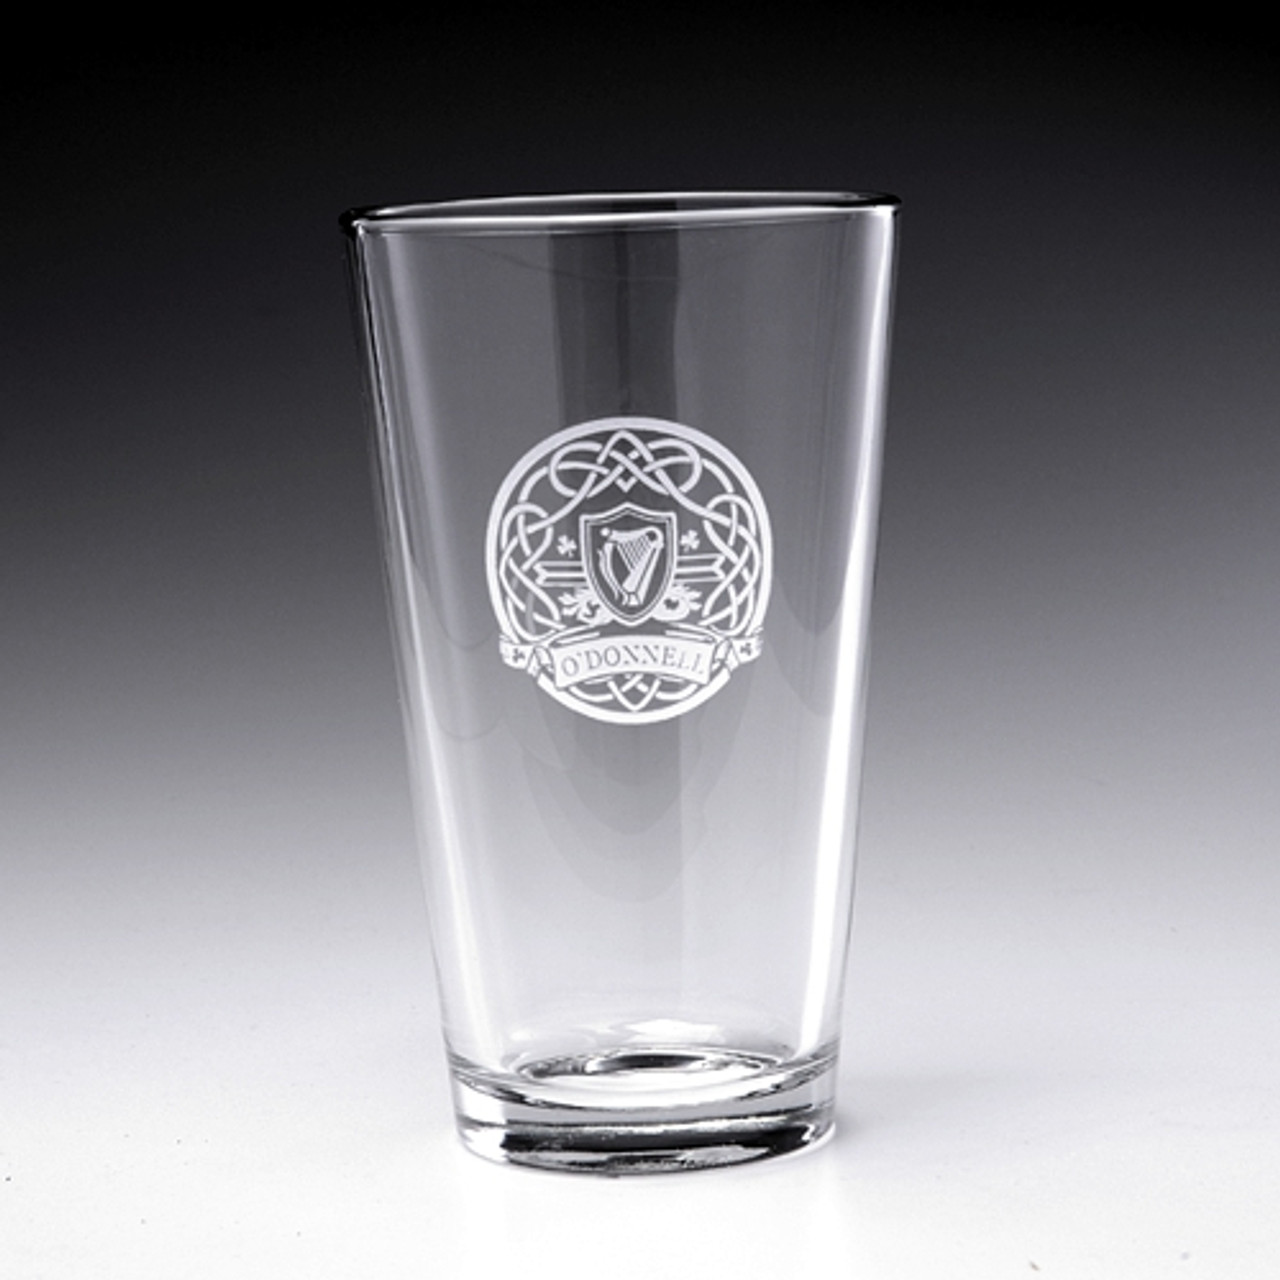 https://cdn11.bigcommerce.com/s-eb0e0/images/stencil/1280x1280/products/407/1692/1657-personalized-celtic-harp-pint-glass__46567.1480184759.jpg?c=2